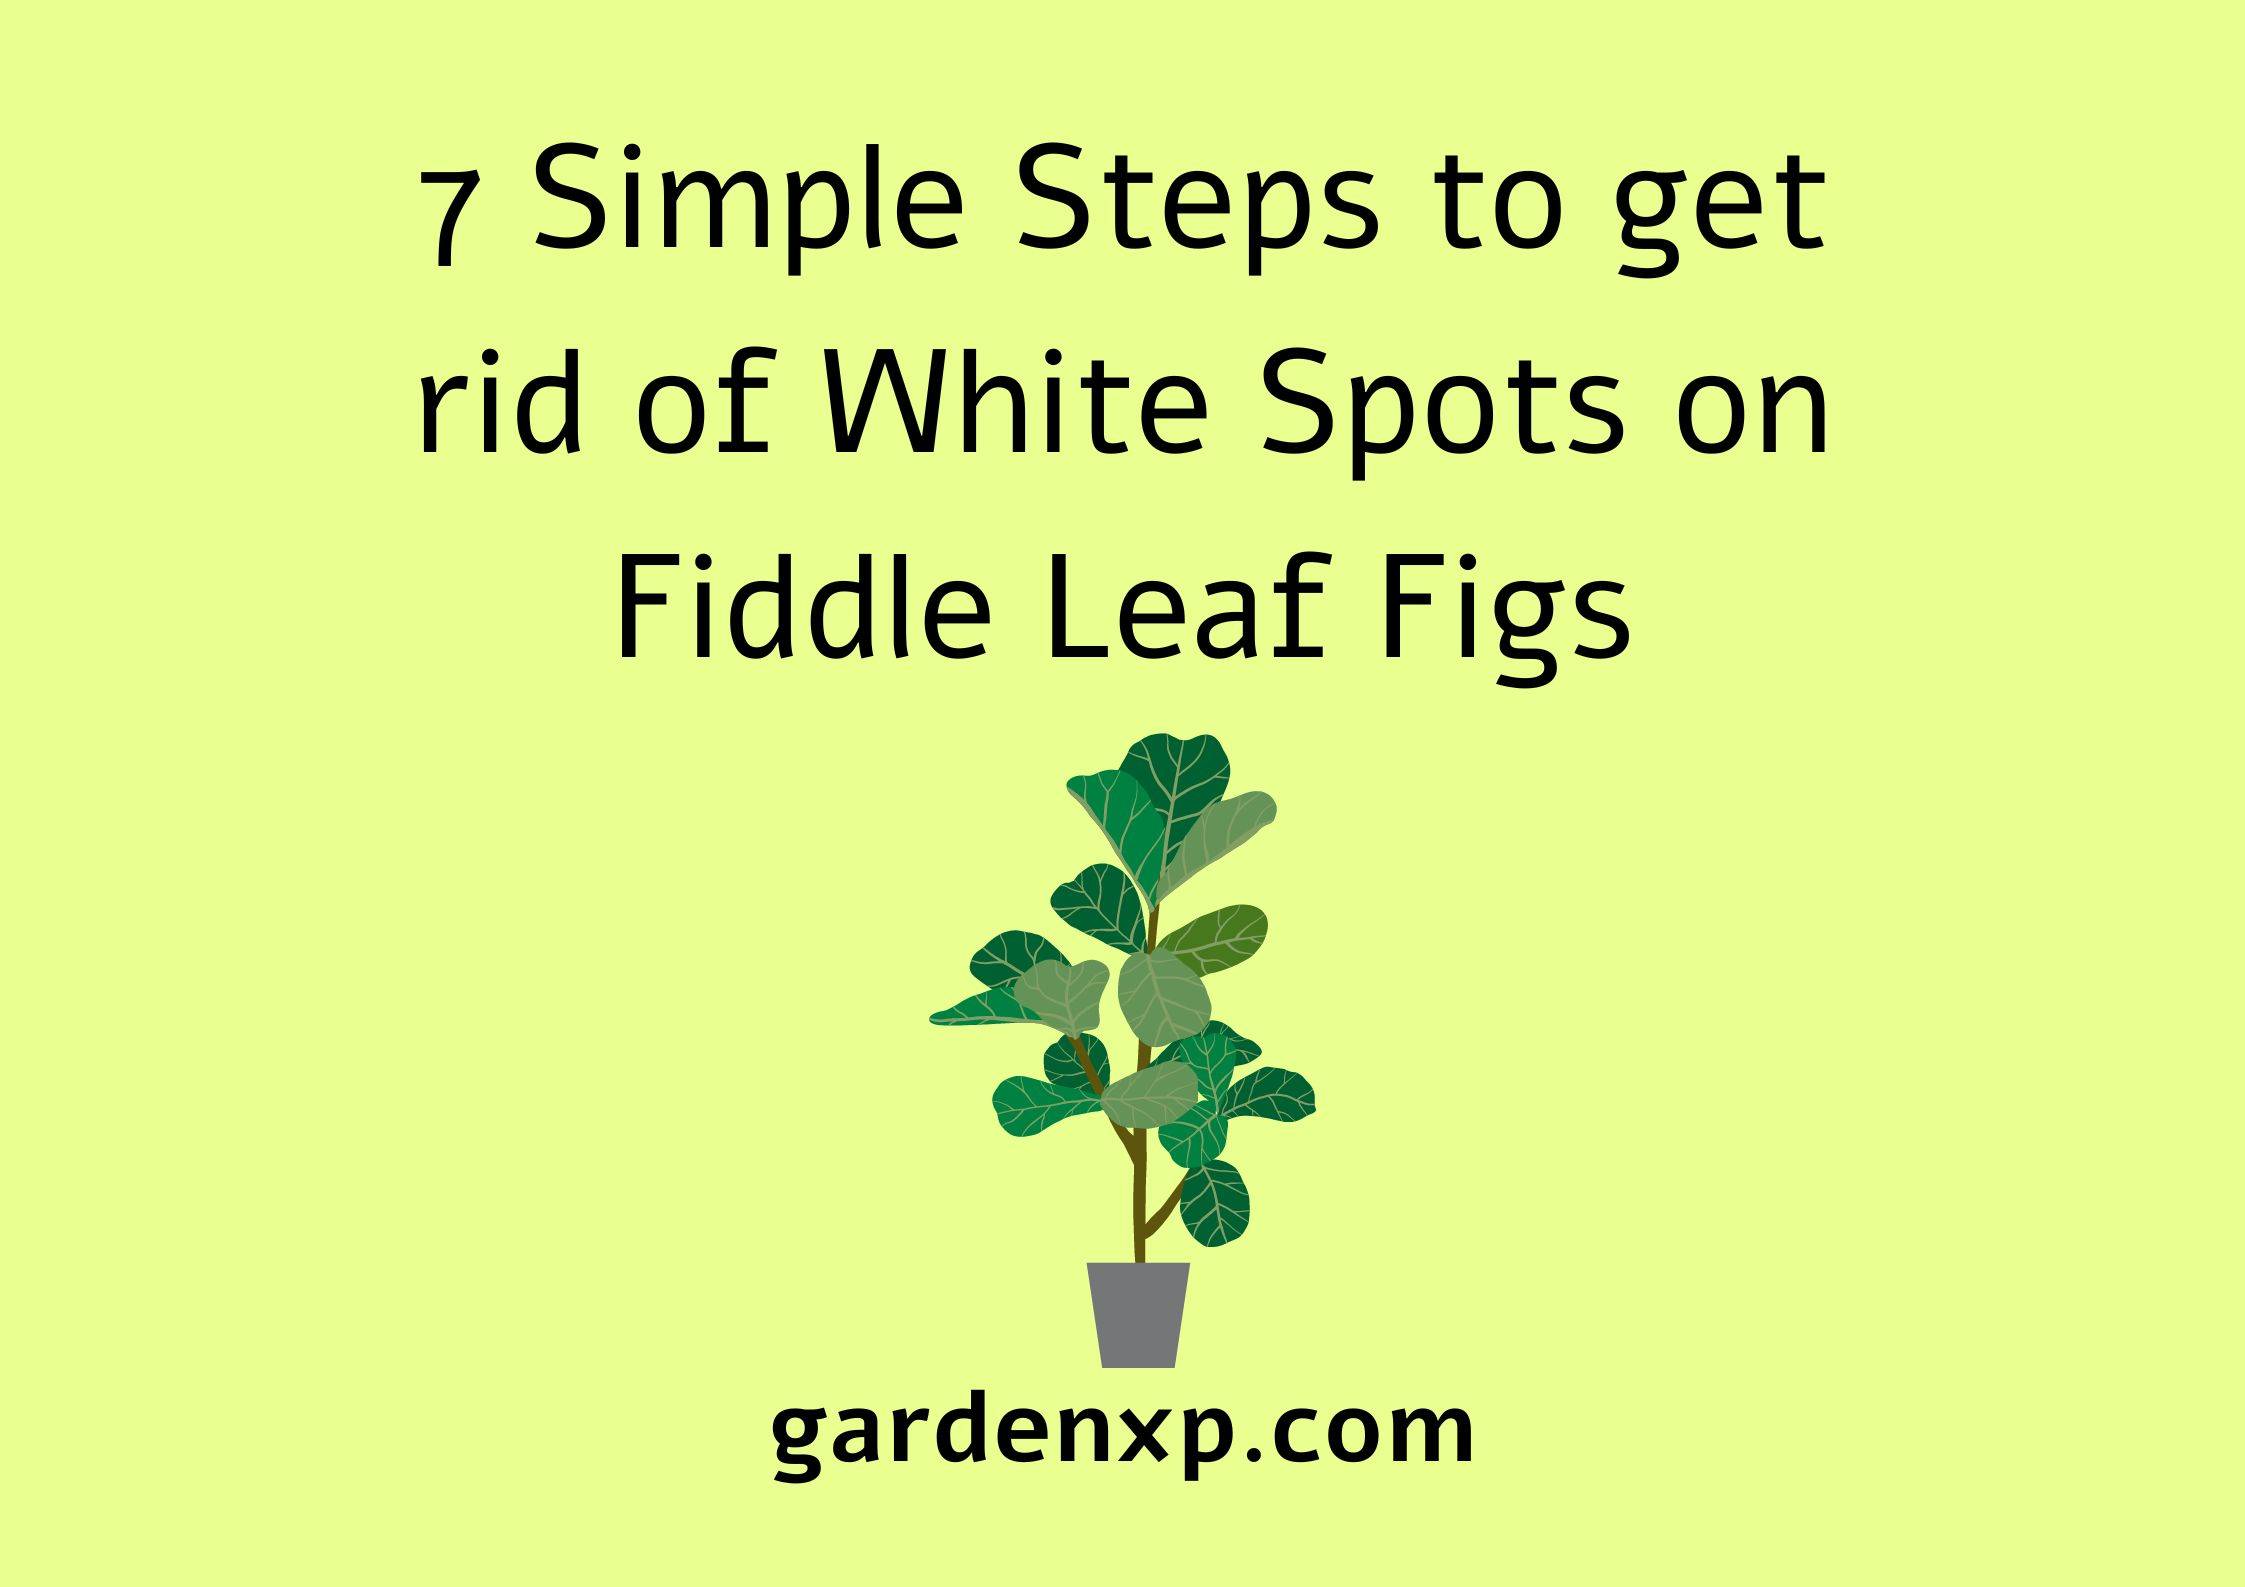 7 Simple Steps to get rid of White Spots on Fiddle Leaf Figs